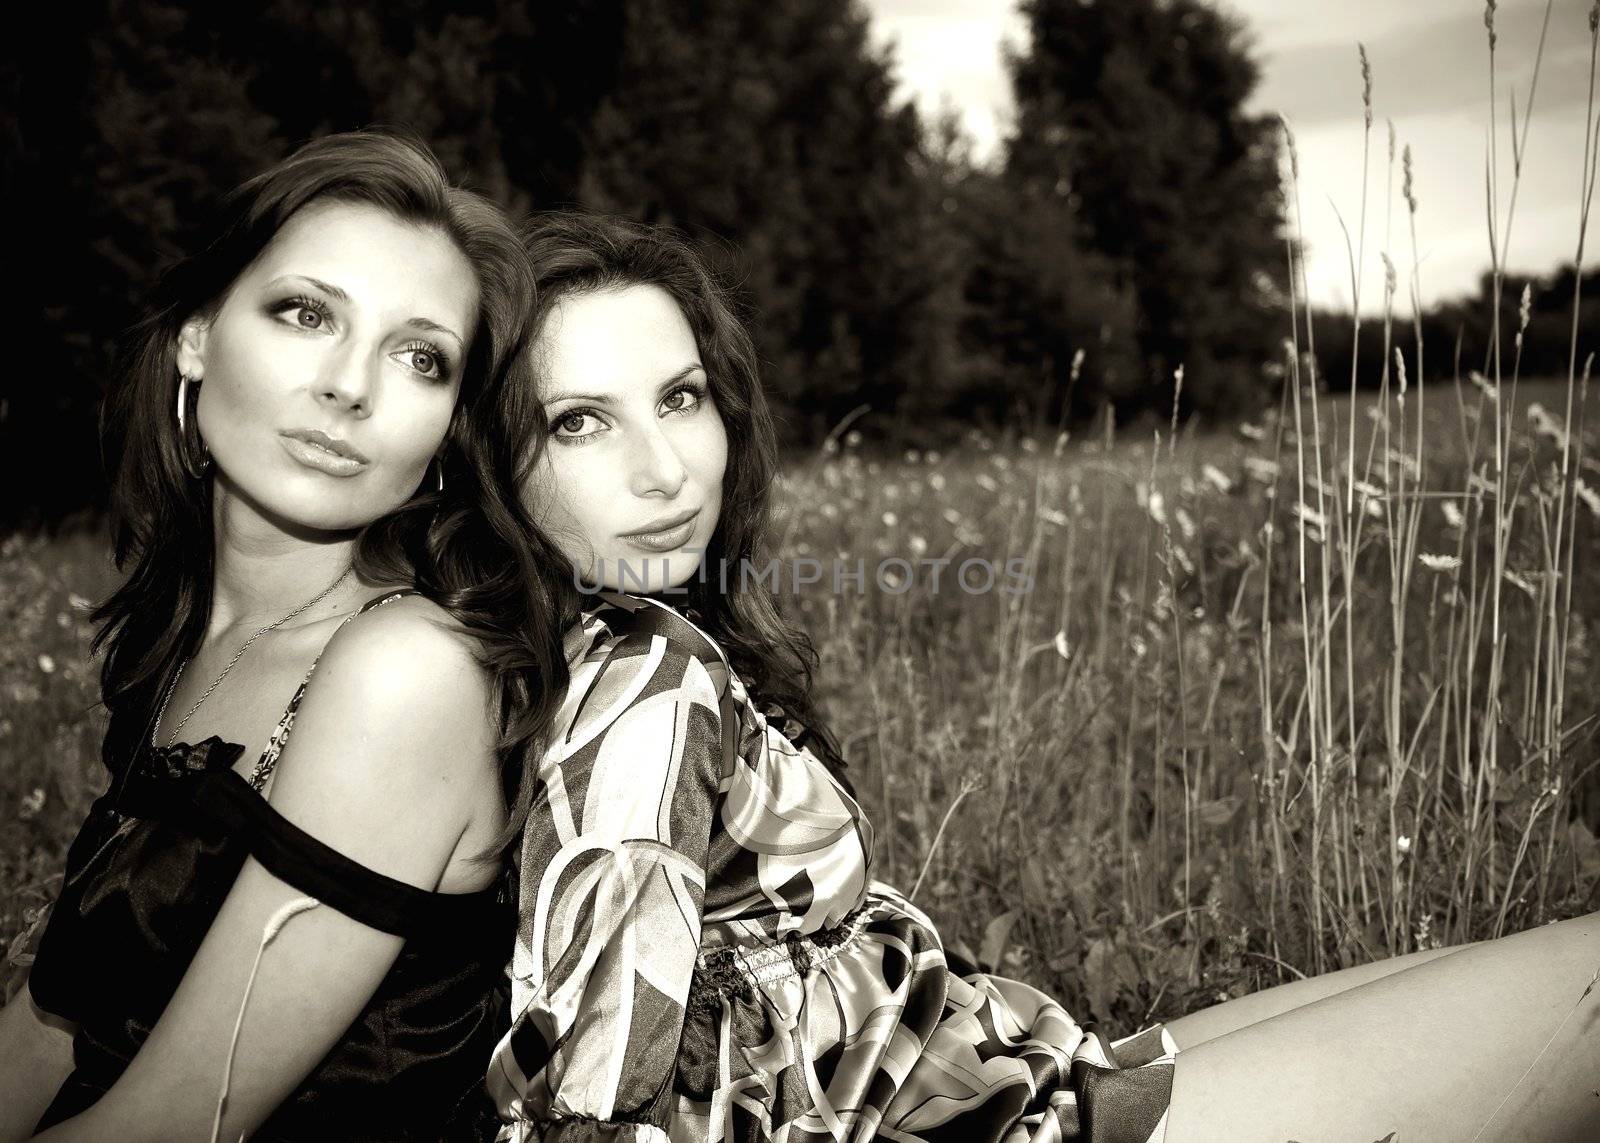 Two sensual girls sitting closely in the grass